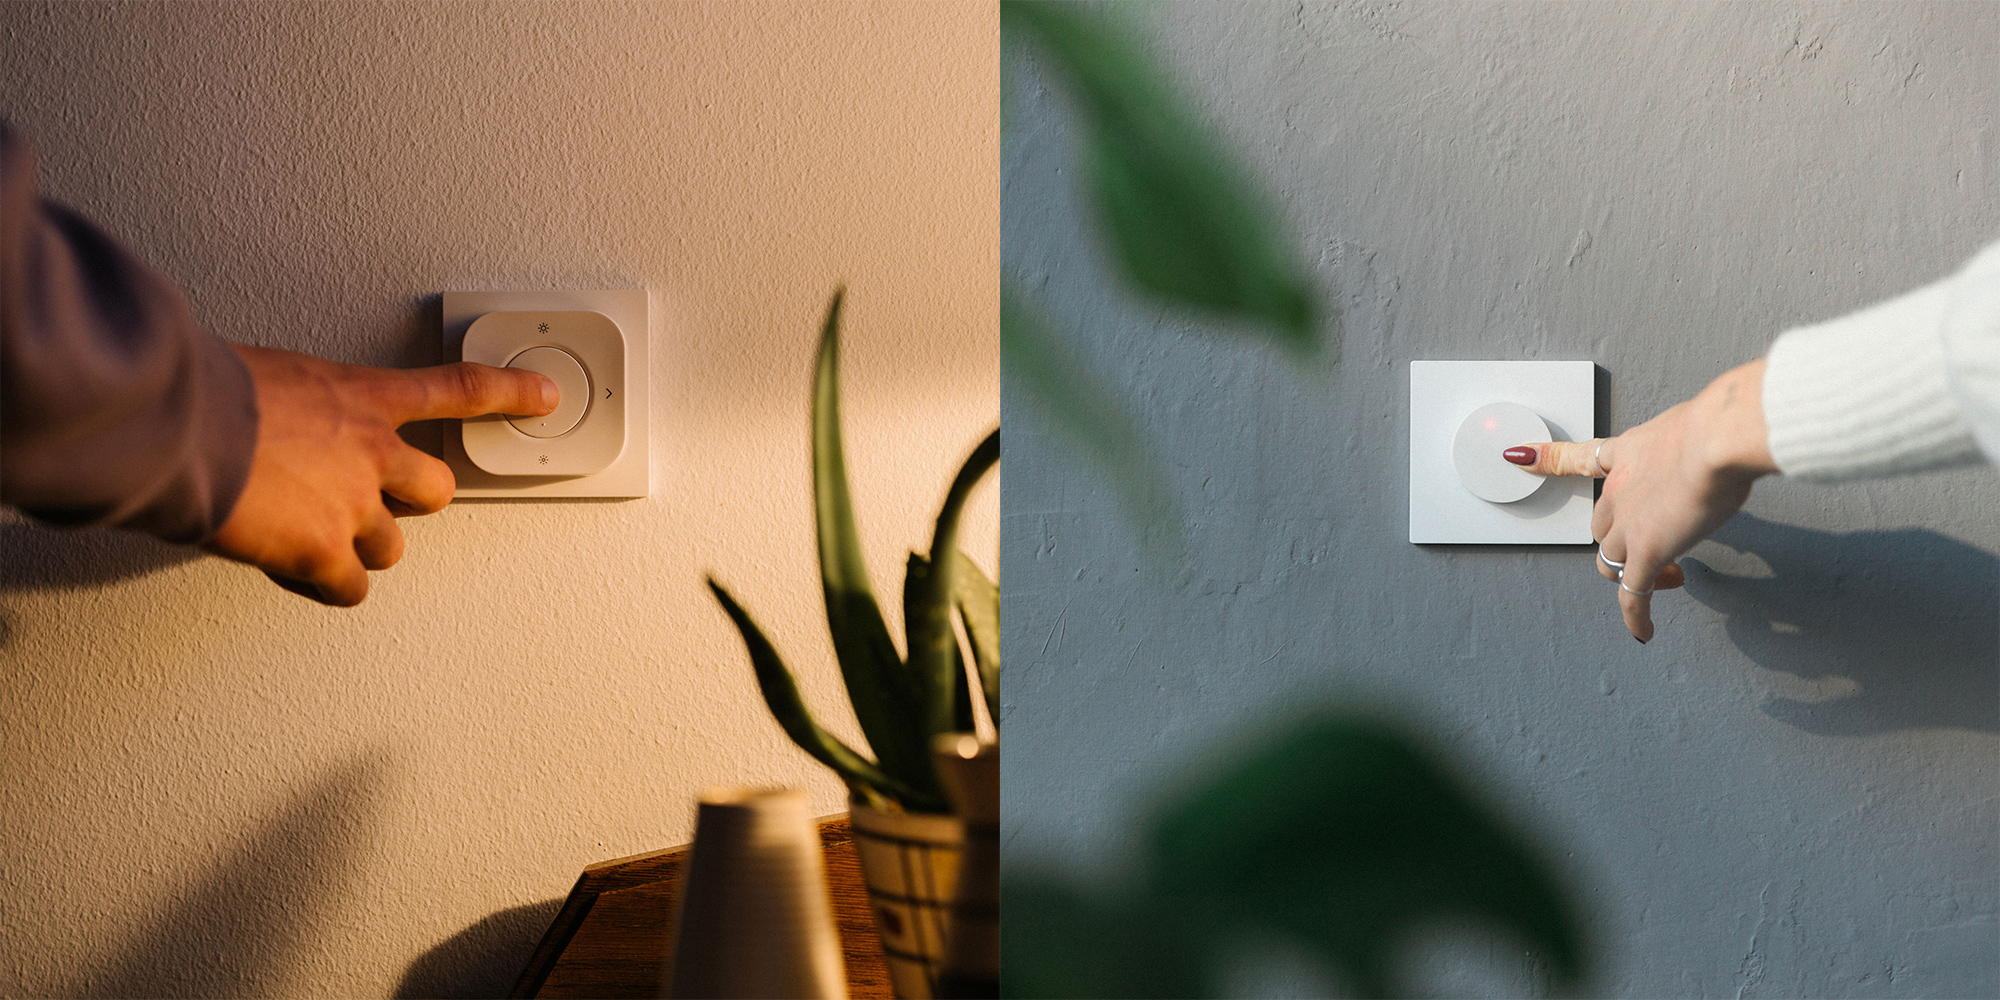 Philips Hue and Innr: Where do you get more for your money